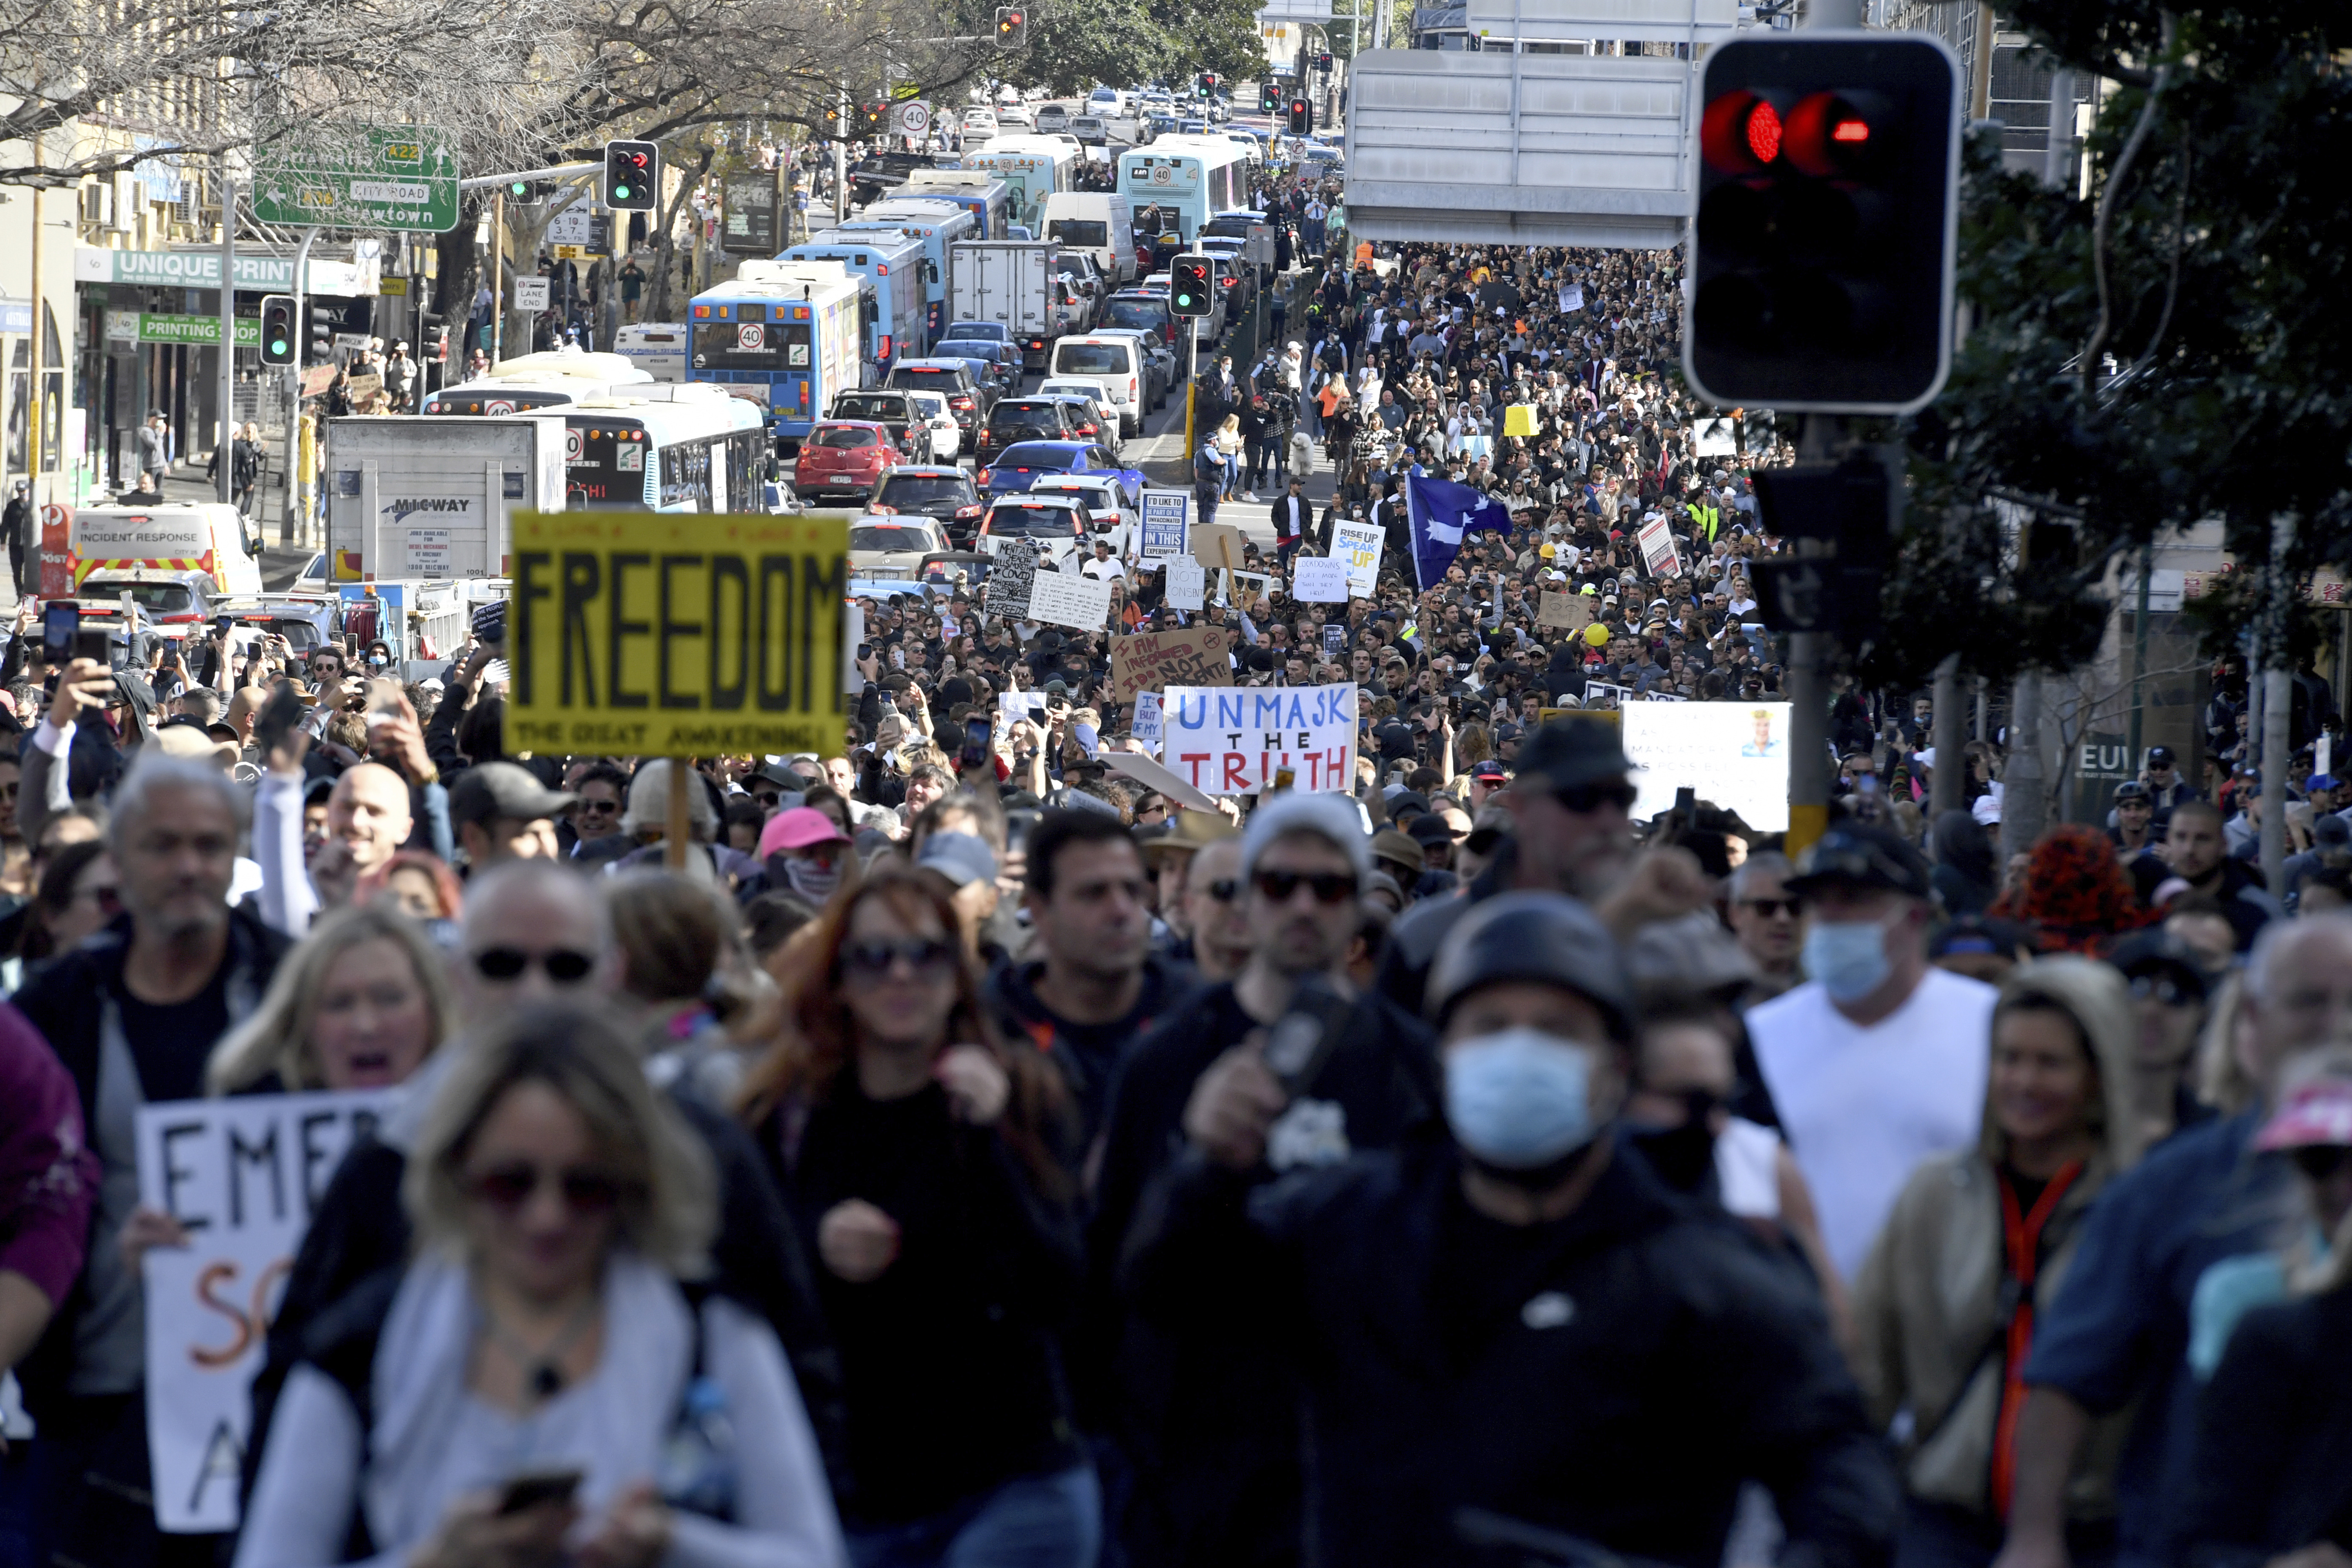 Protesters march through the streets in an anti-lockdown rally in Sydney